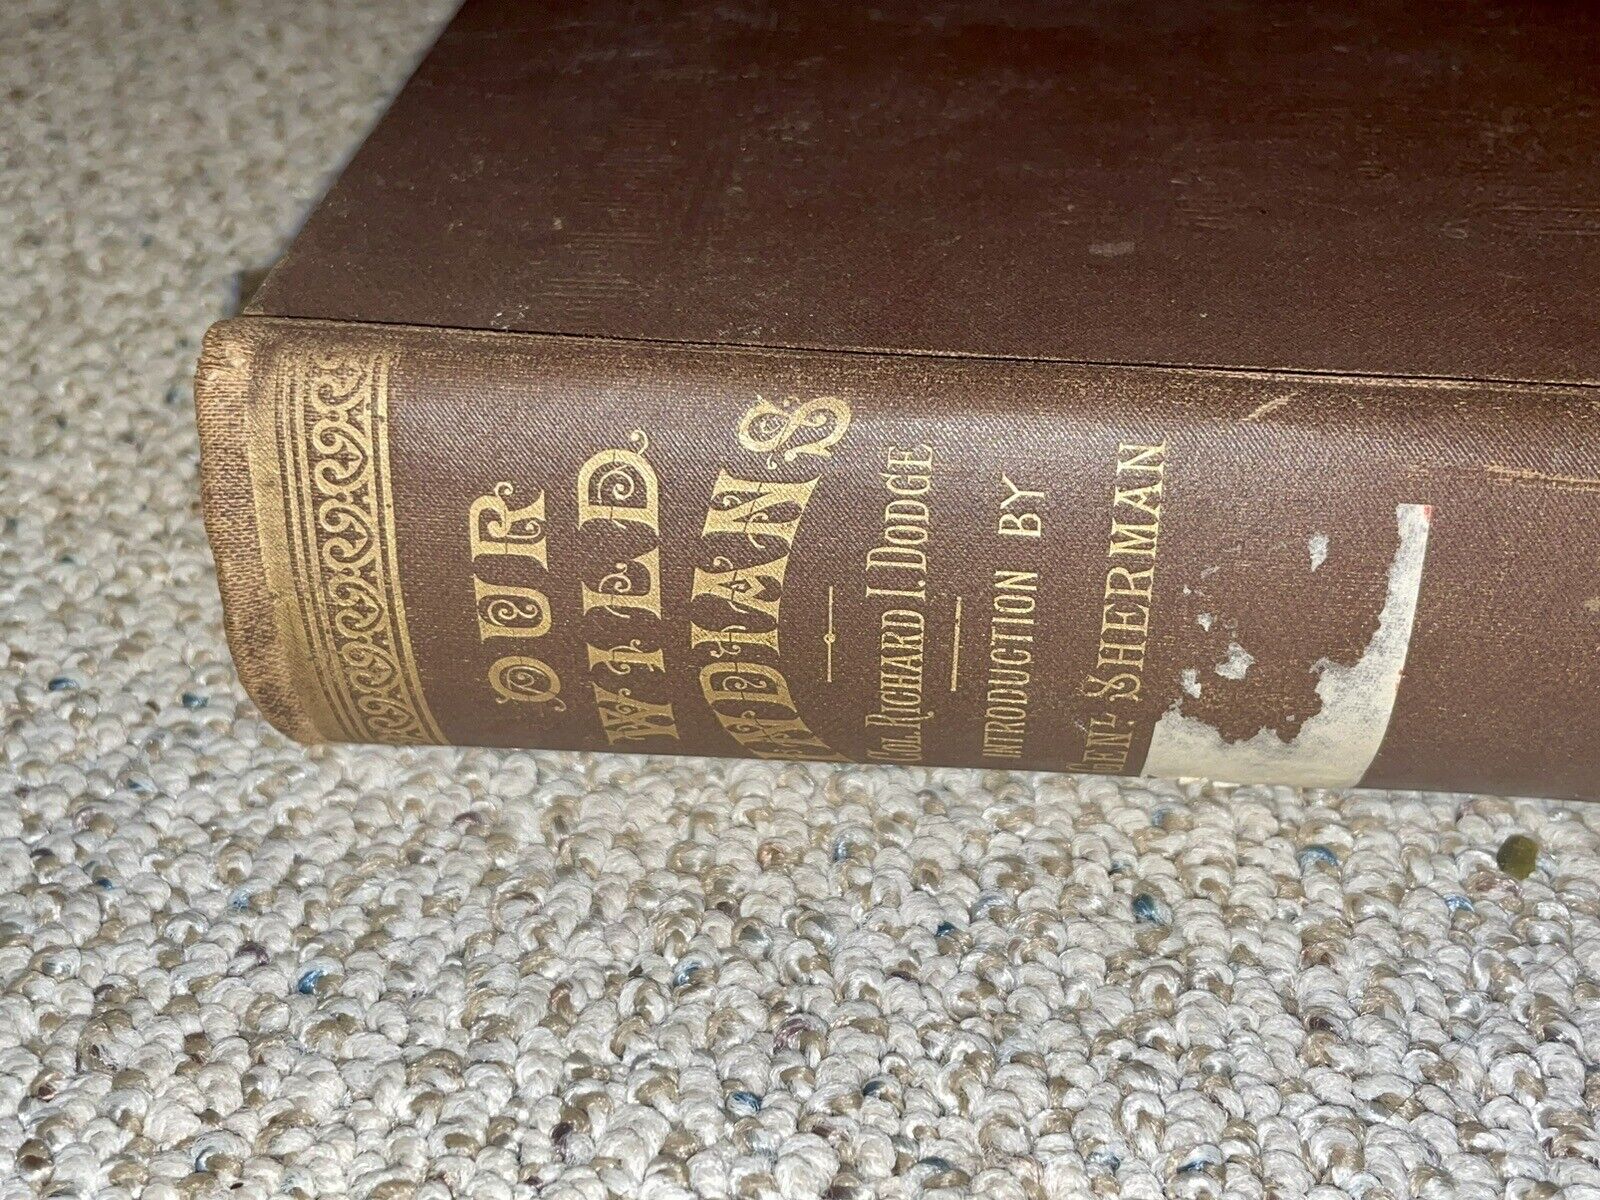 RARE Antique 1883 “Our Wild Indians” by Sherman Richard Dodge Hardcover Book